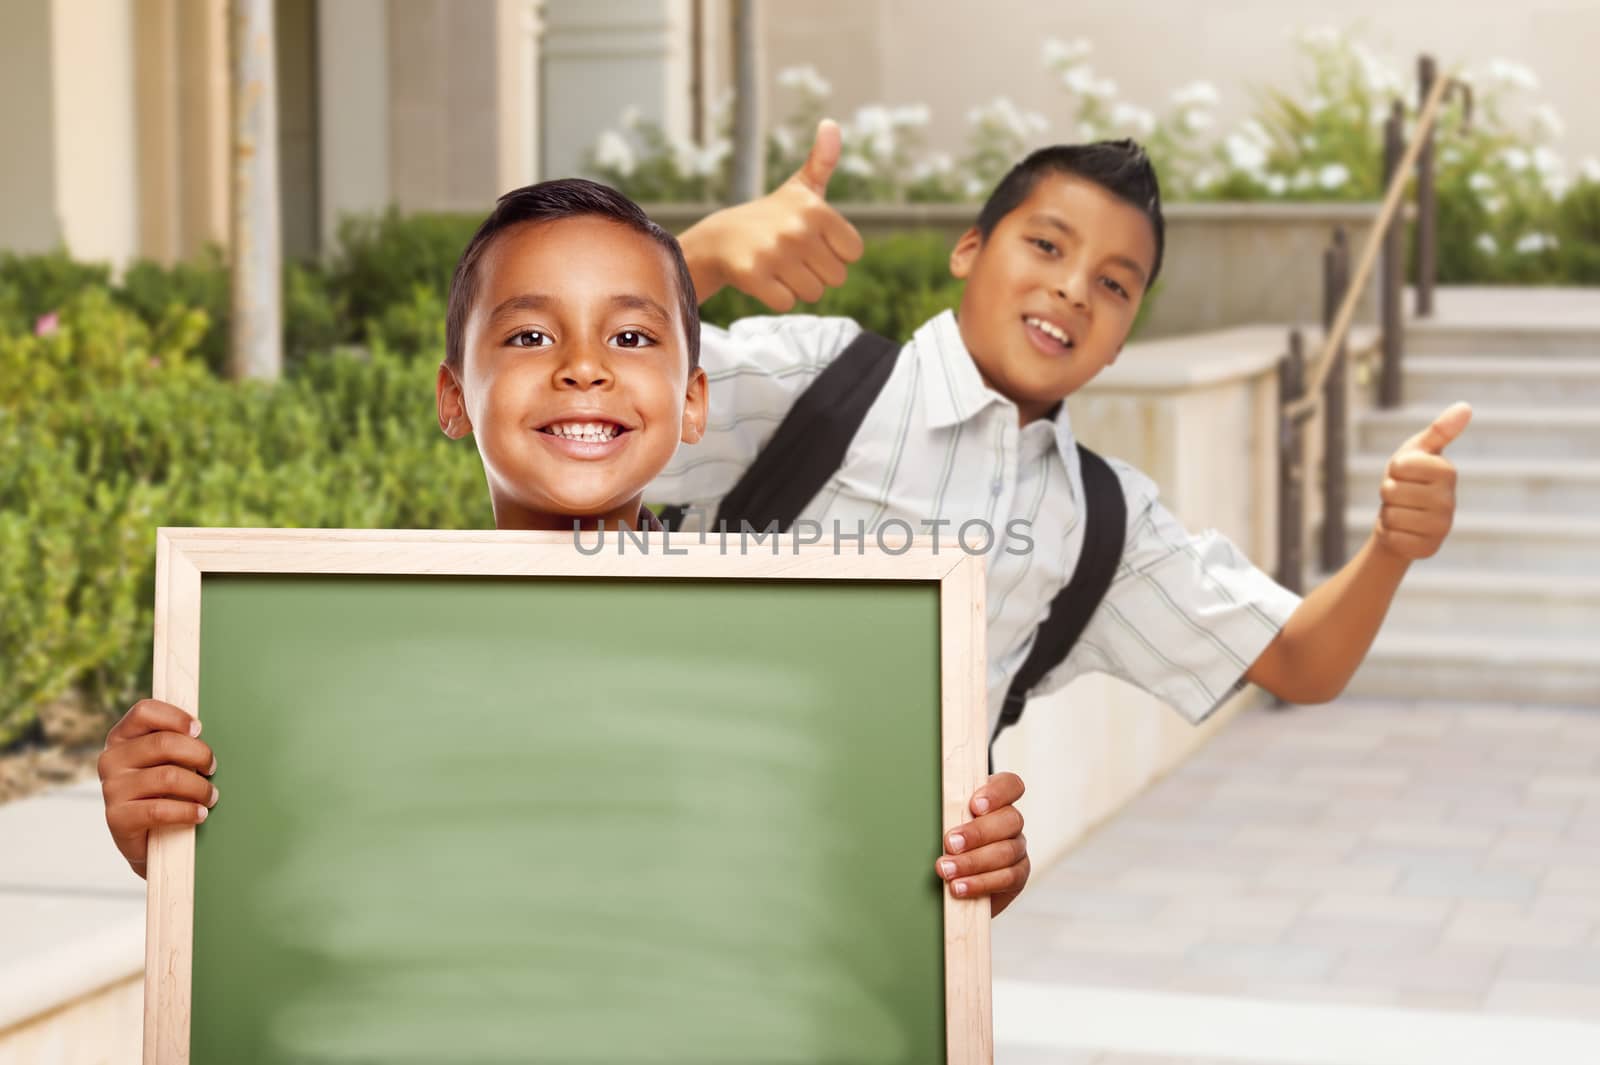 Happy Hispanic Boys with Thumbs Up Holding Blank Chalk Board Outside on School Campus.